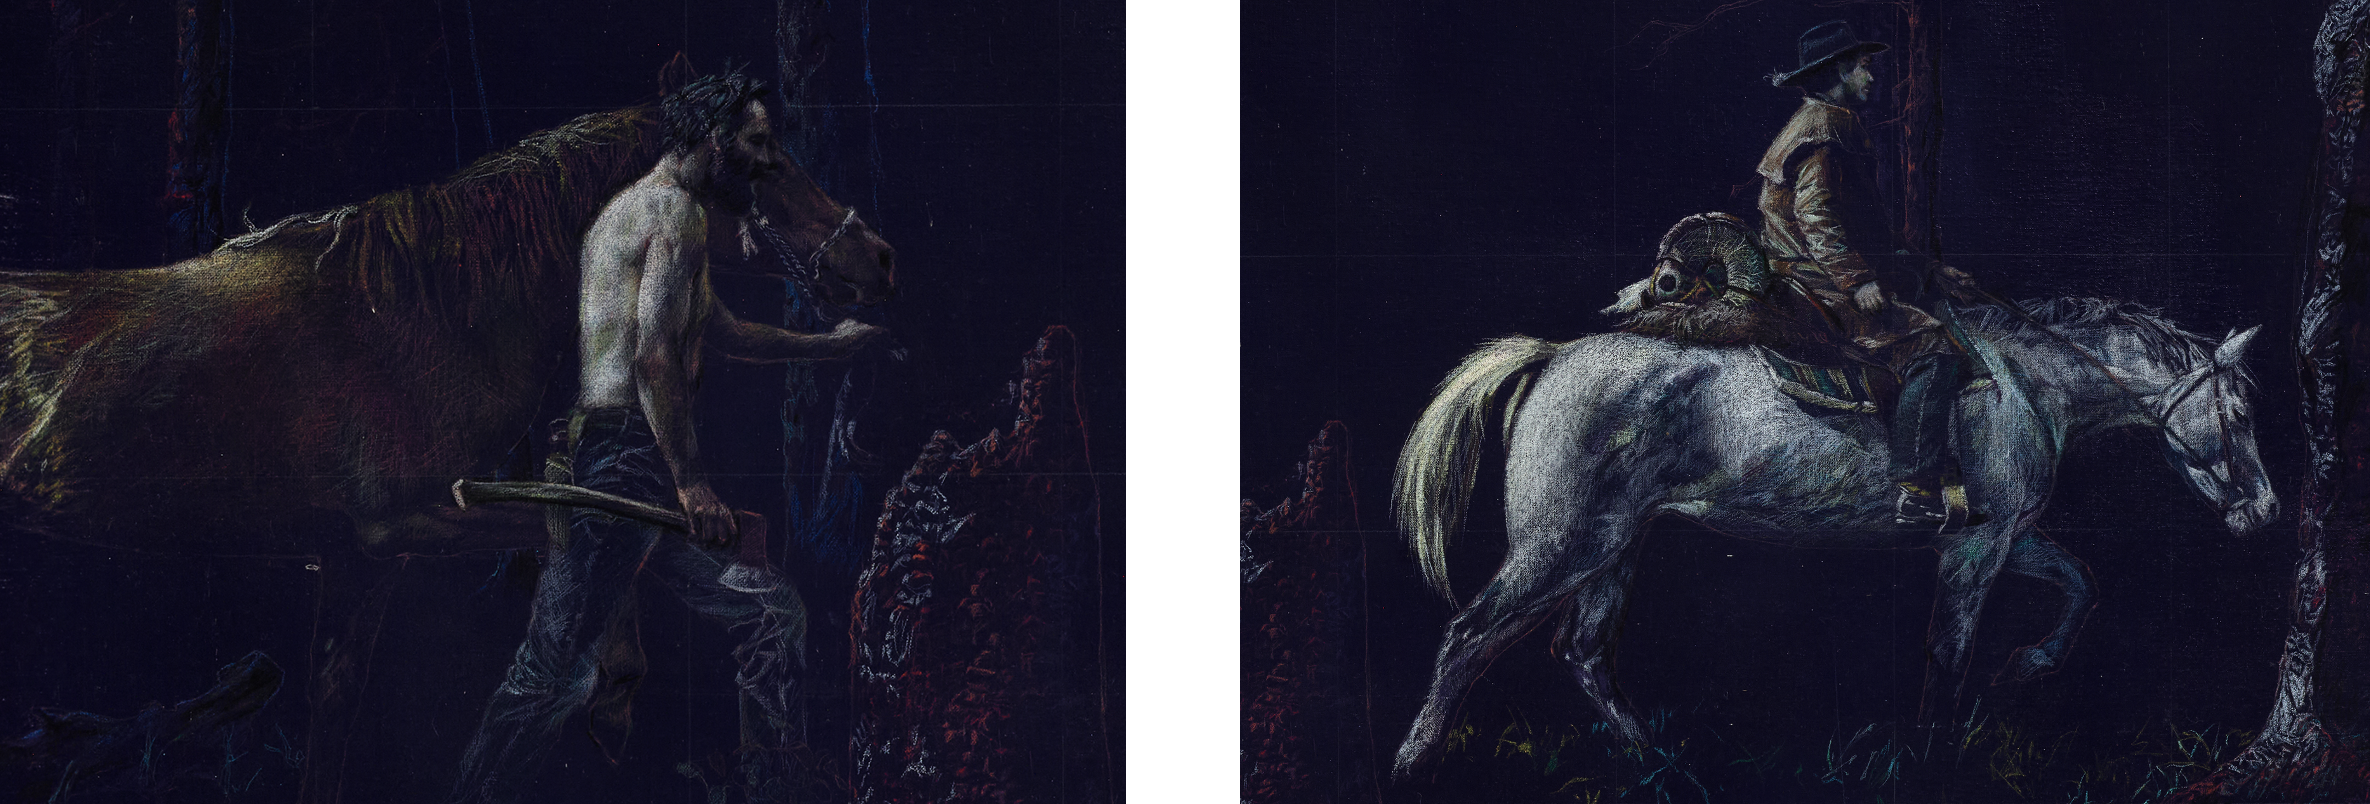 Two images, one of a topless man leading a horse and the second of a man riding a horse